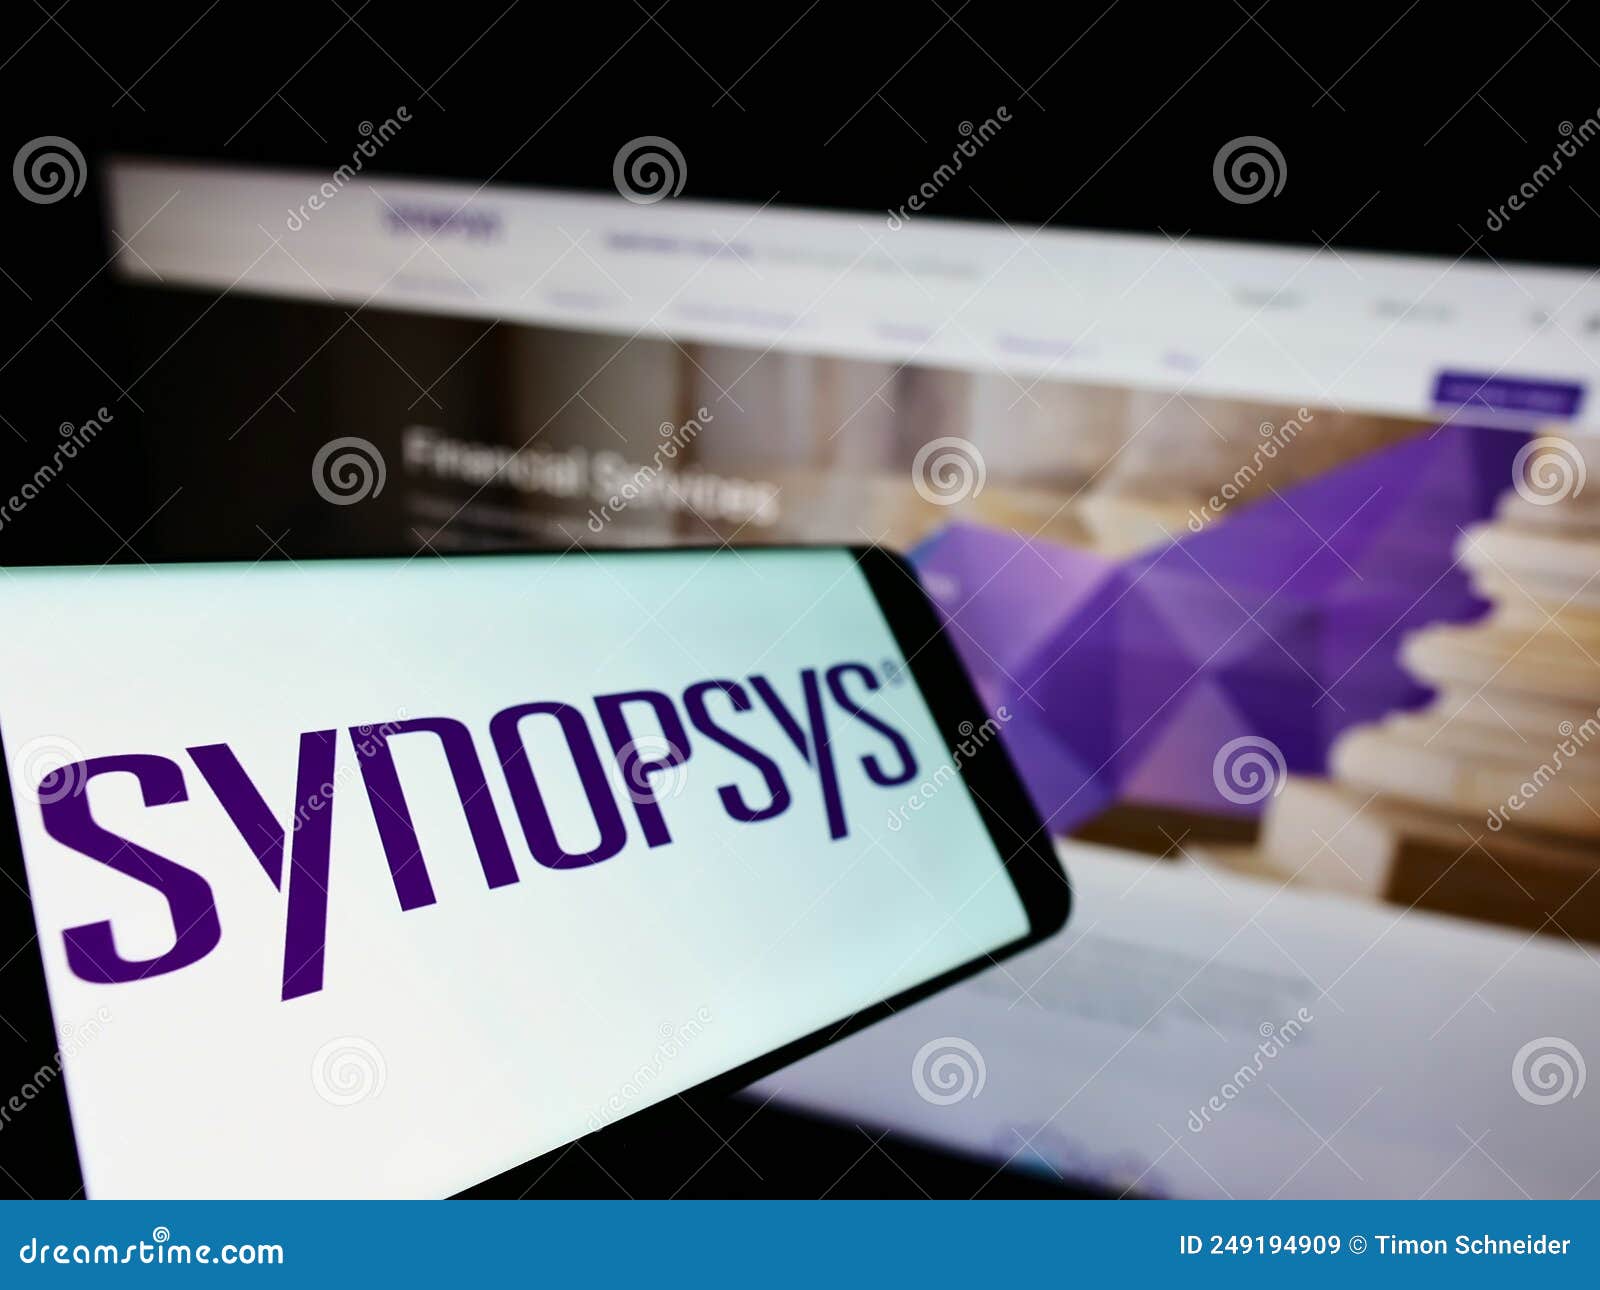 Synopsys and Samsung Foundry Deepen Collaboration to Accelerate Multi-Die  System Design for Advanced Samsung Processes